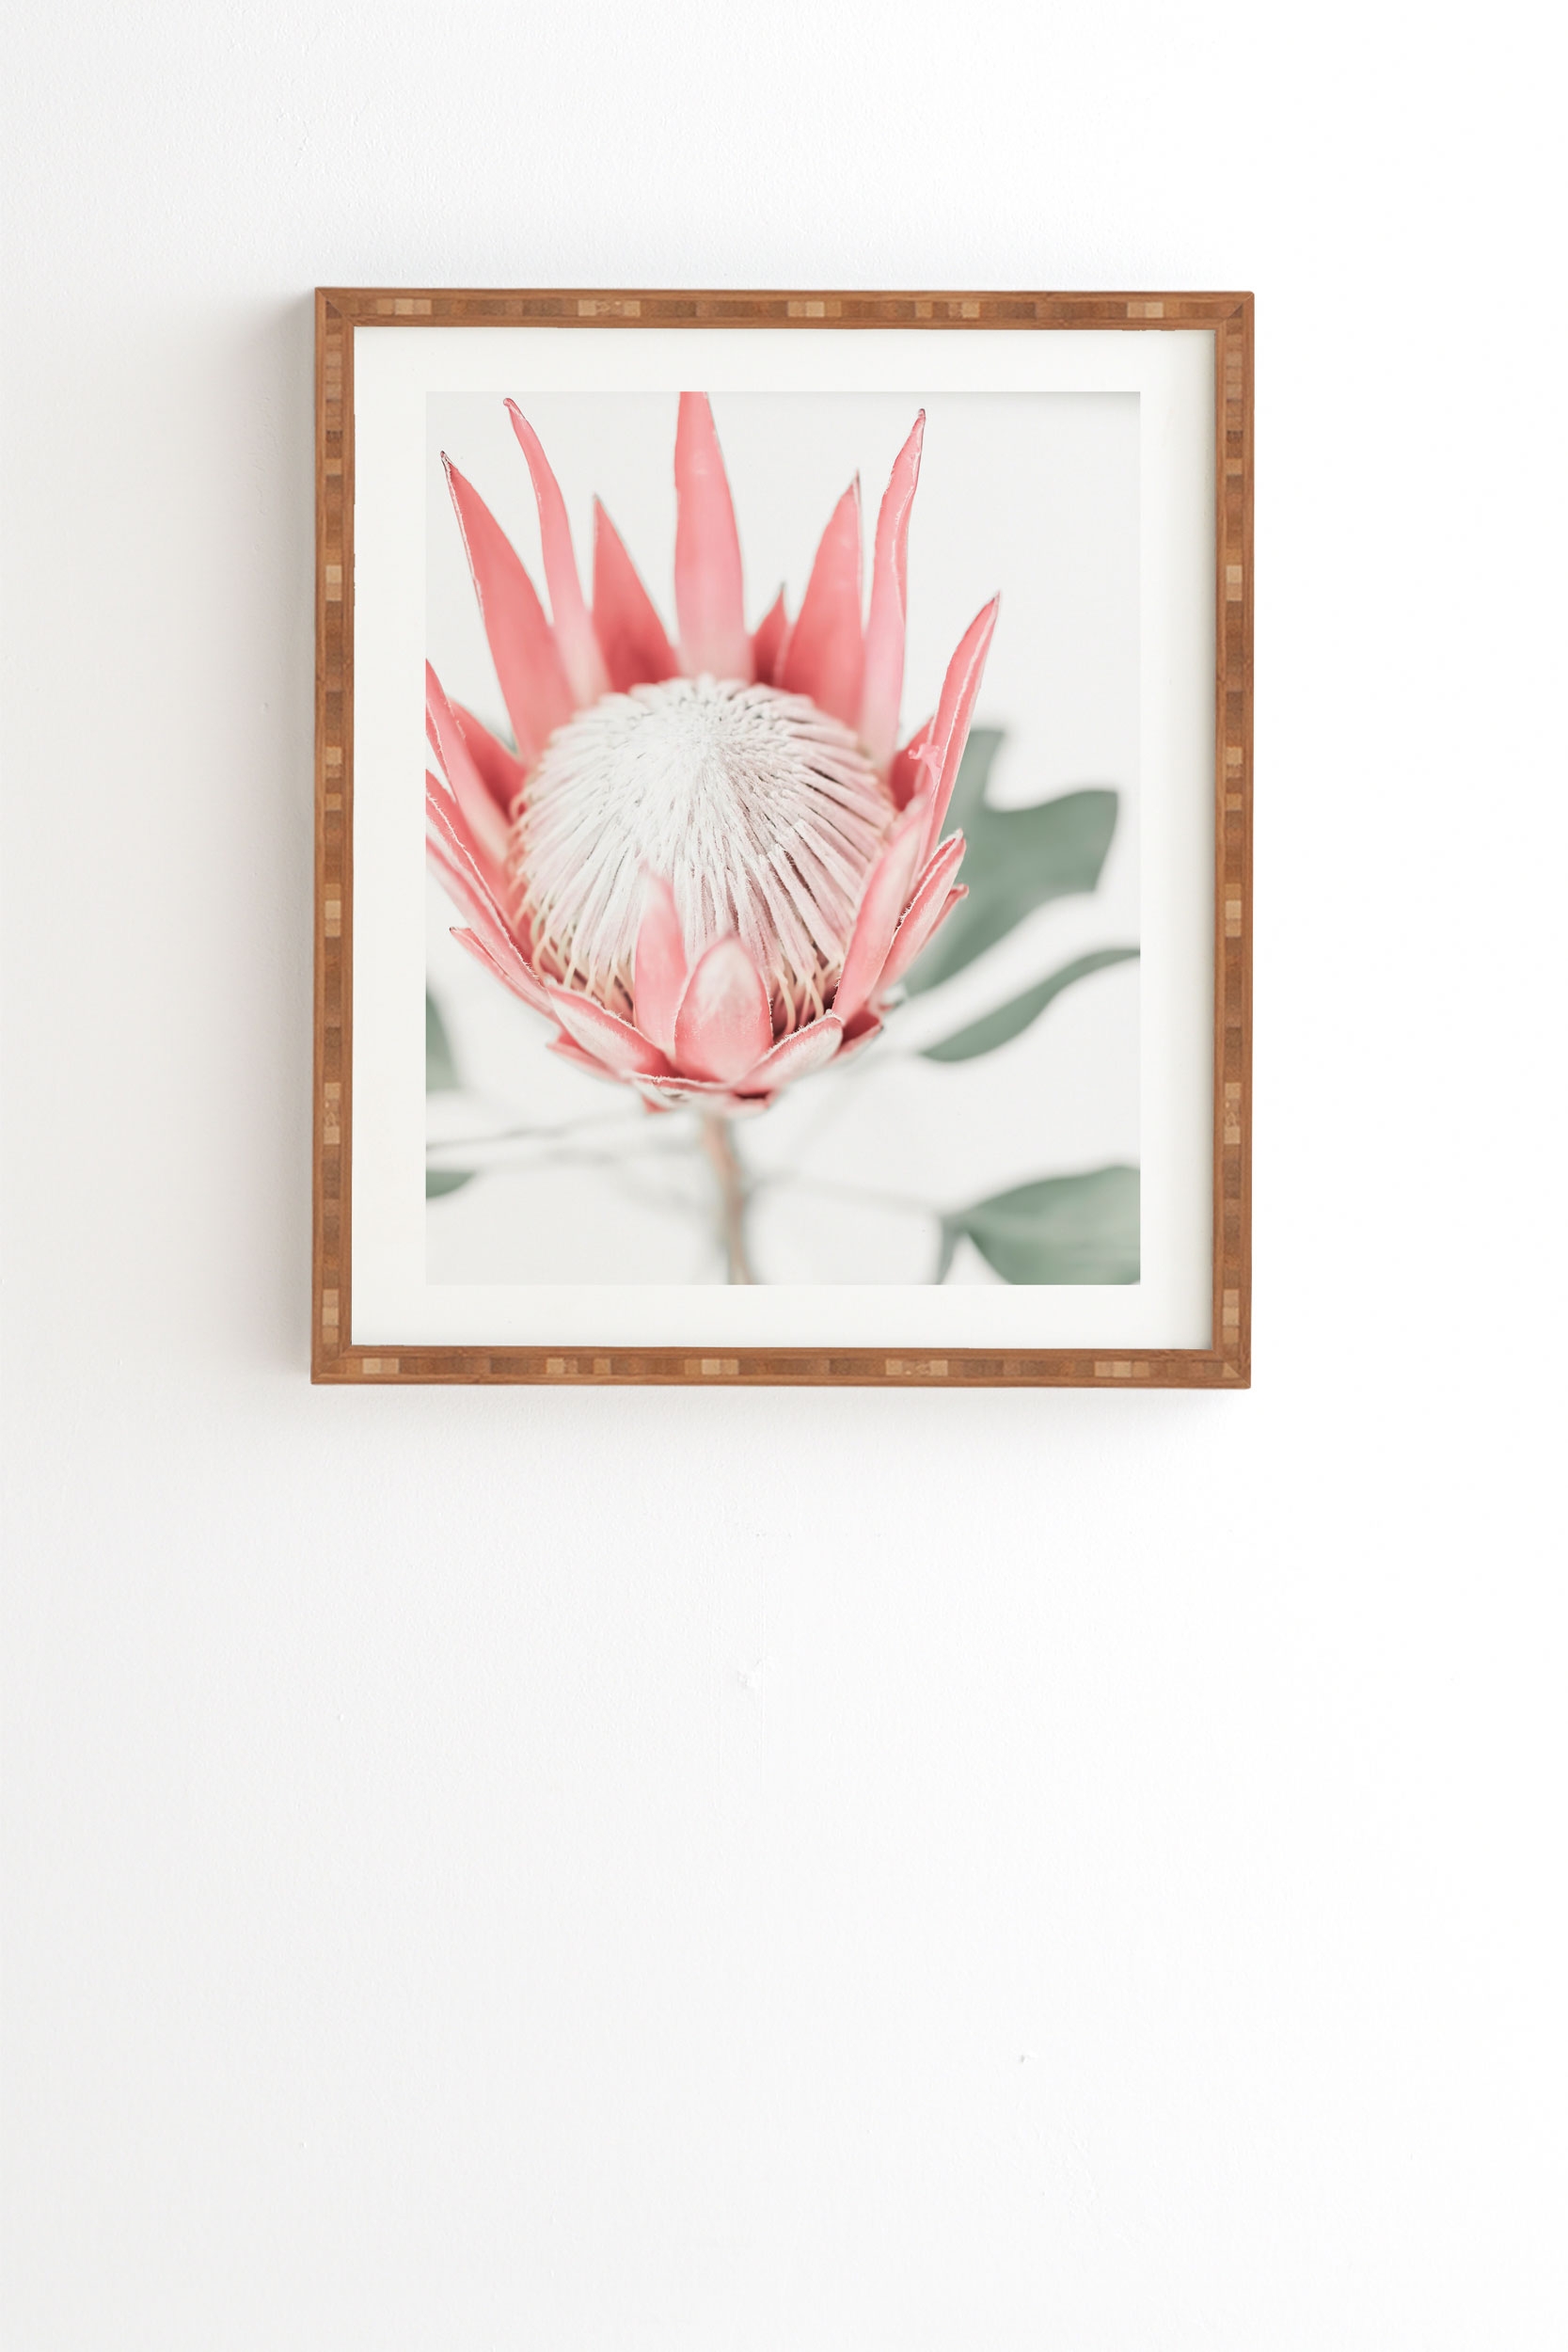 King Protea Flower Iii by Ingrid Beddoes - Framed Wall Art Bamboo 11" x 13" - Image 0